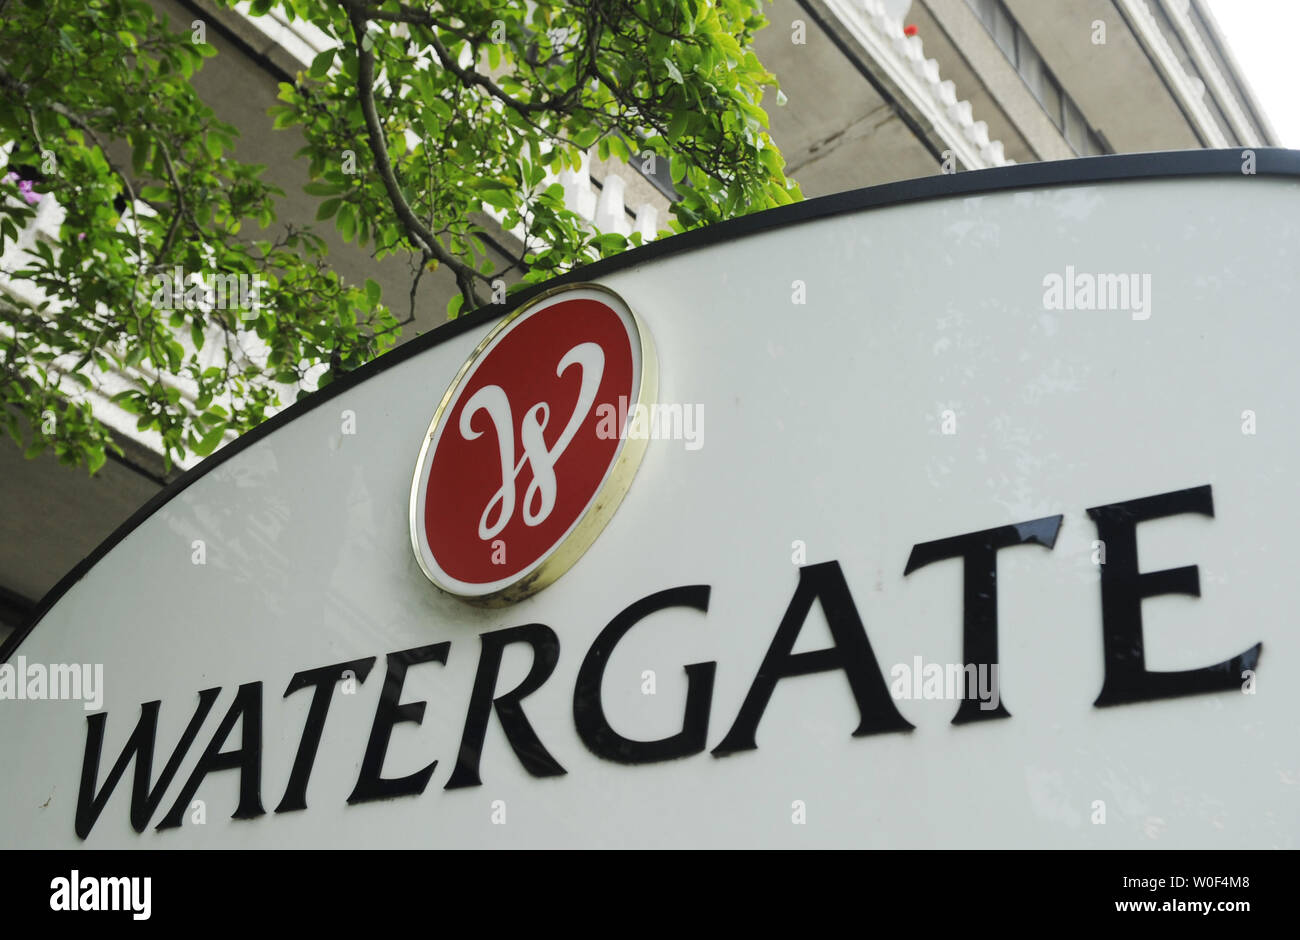 The Watergate complex, where the infamous DNC office break-in led to the resignation of U.S. President Richard M. Nixon, is seen in Washington on July 21, 2009. The property is now listed for sale.  (UPI Photo/Alexis C. Glenn) Stock Photo